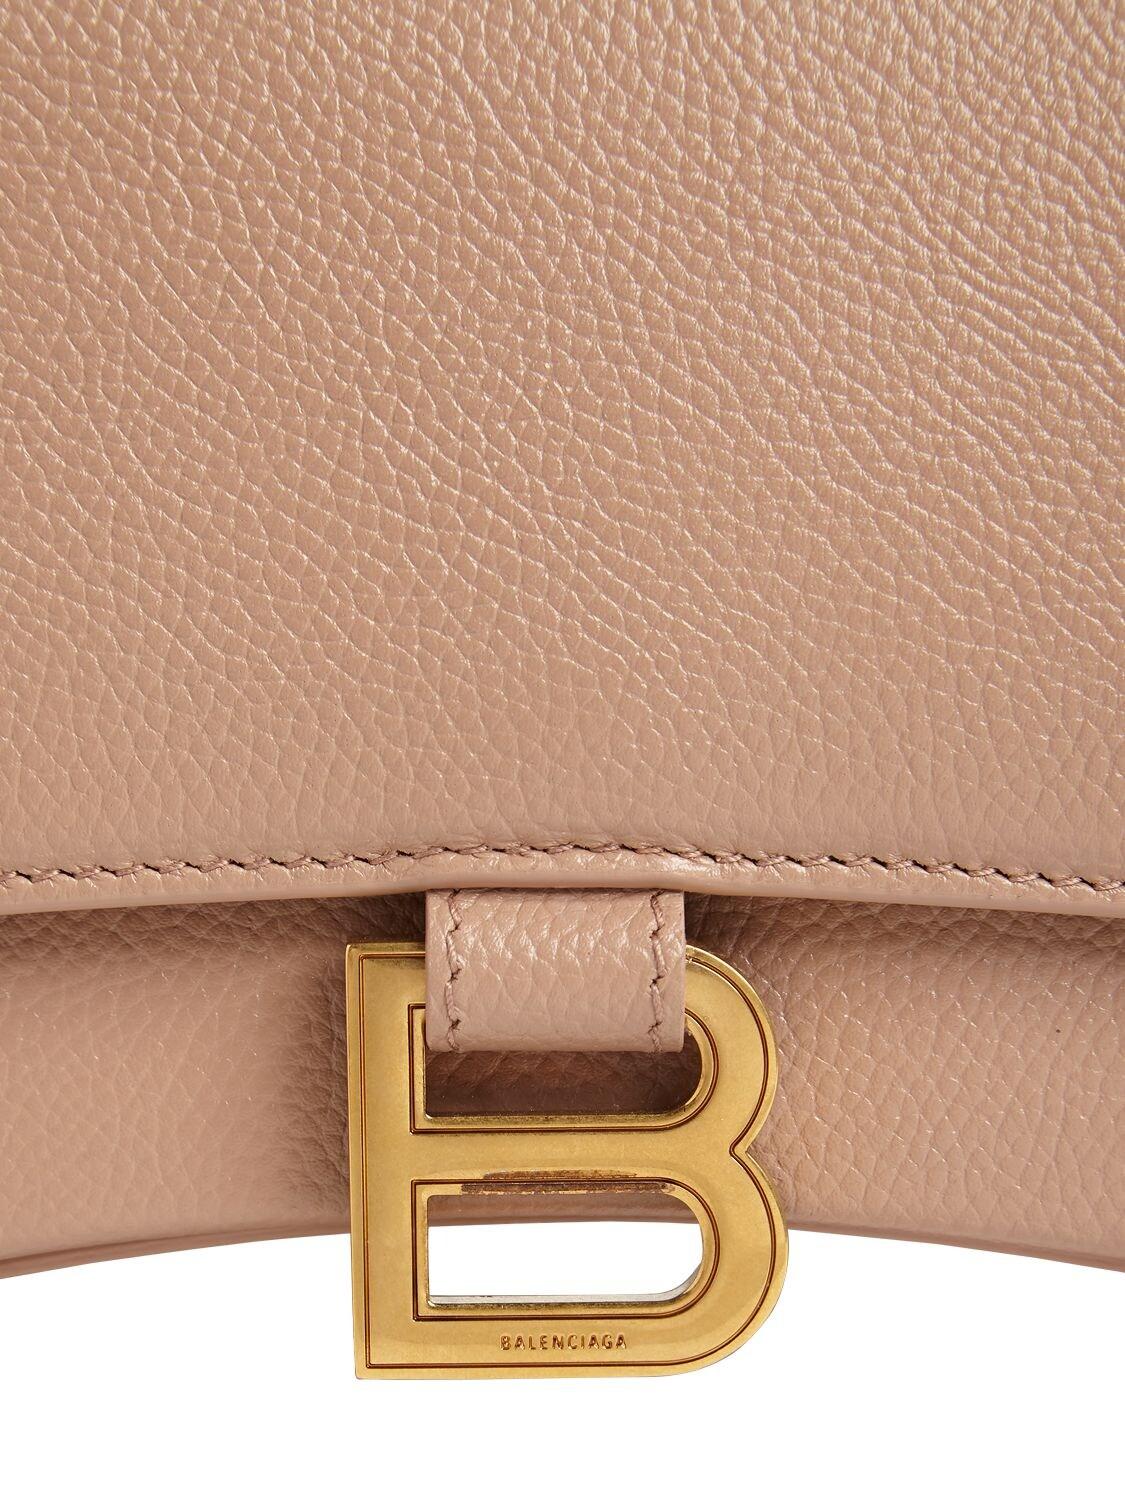 Hourglass leather crossbody bag Balenciaga Camel in Leather - 35659270